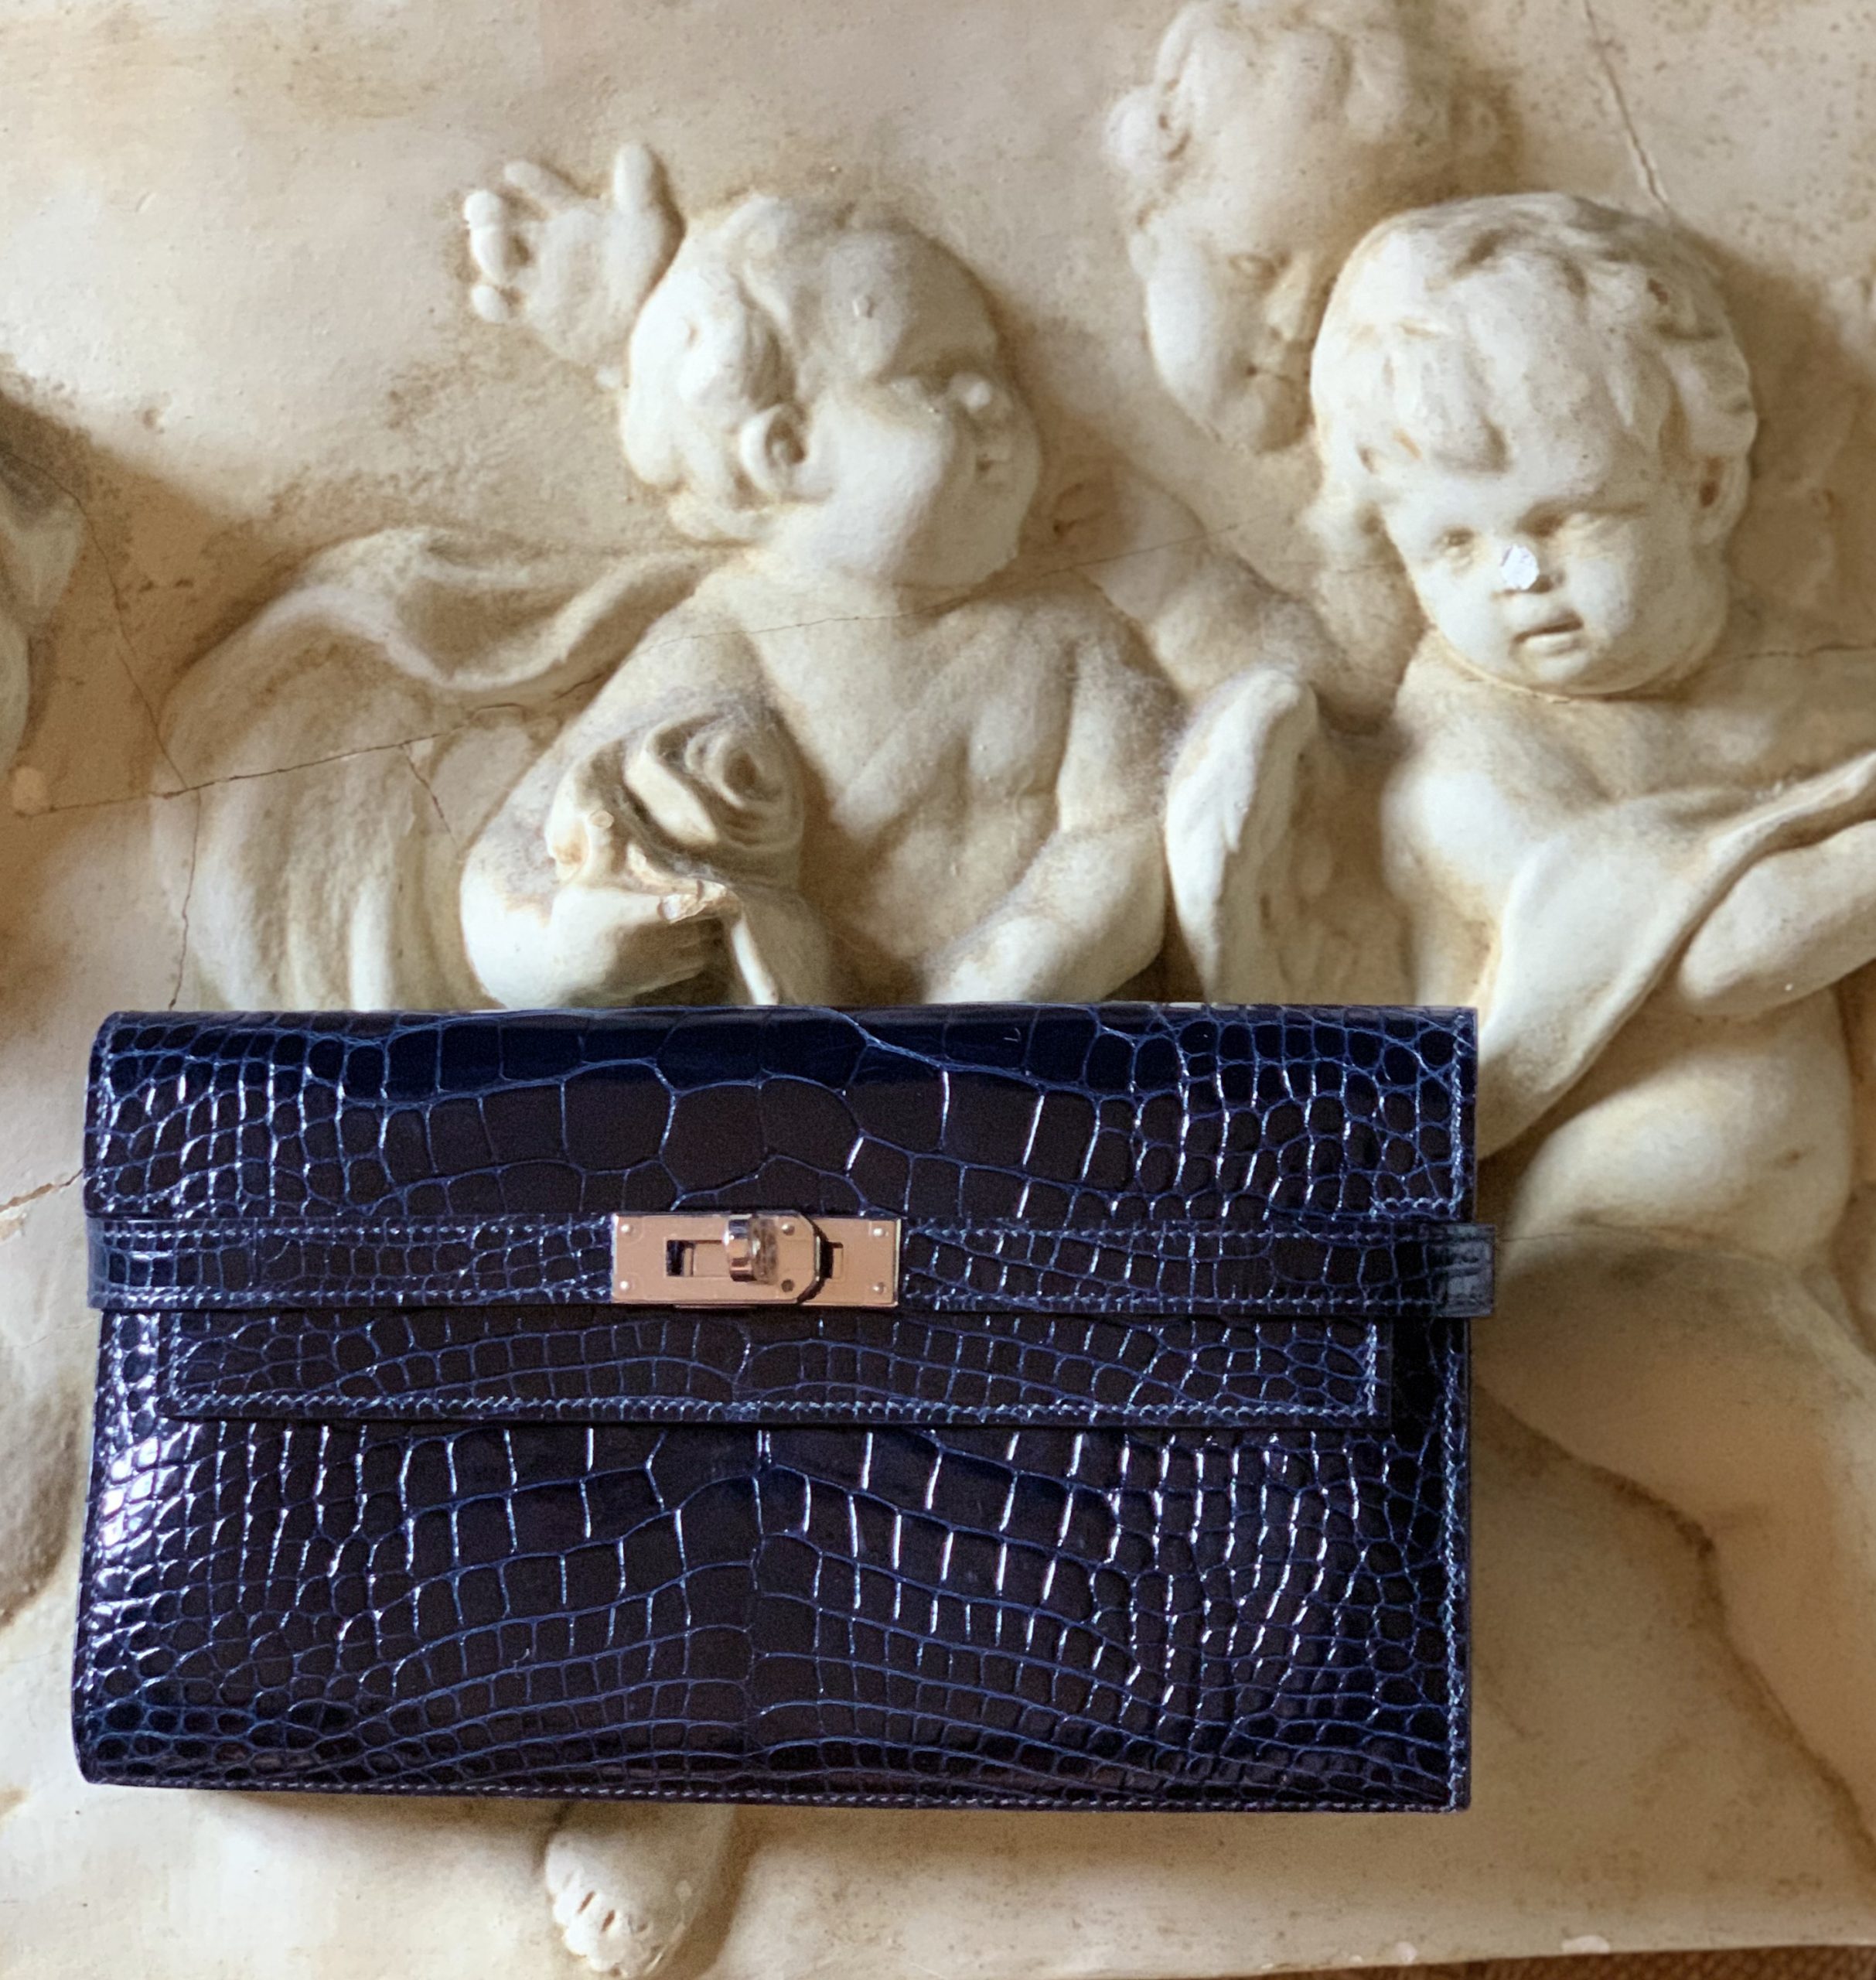 Hermes Kelly Wallet in shiny navy blue alligator with palladium